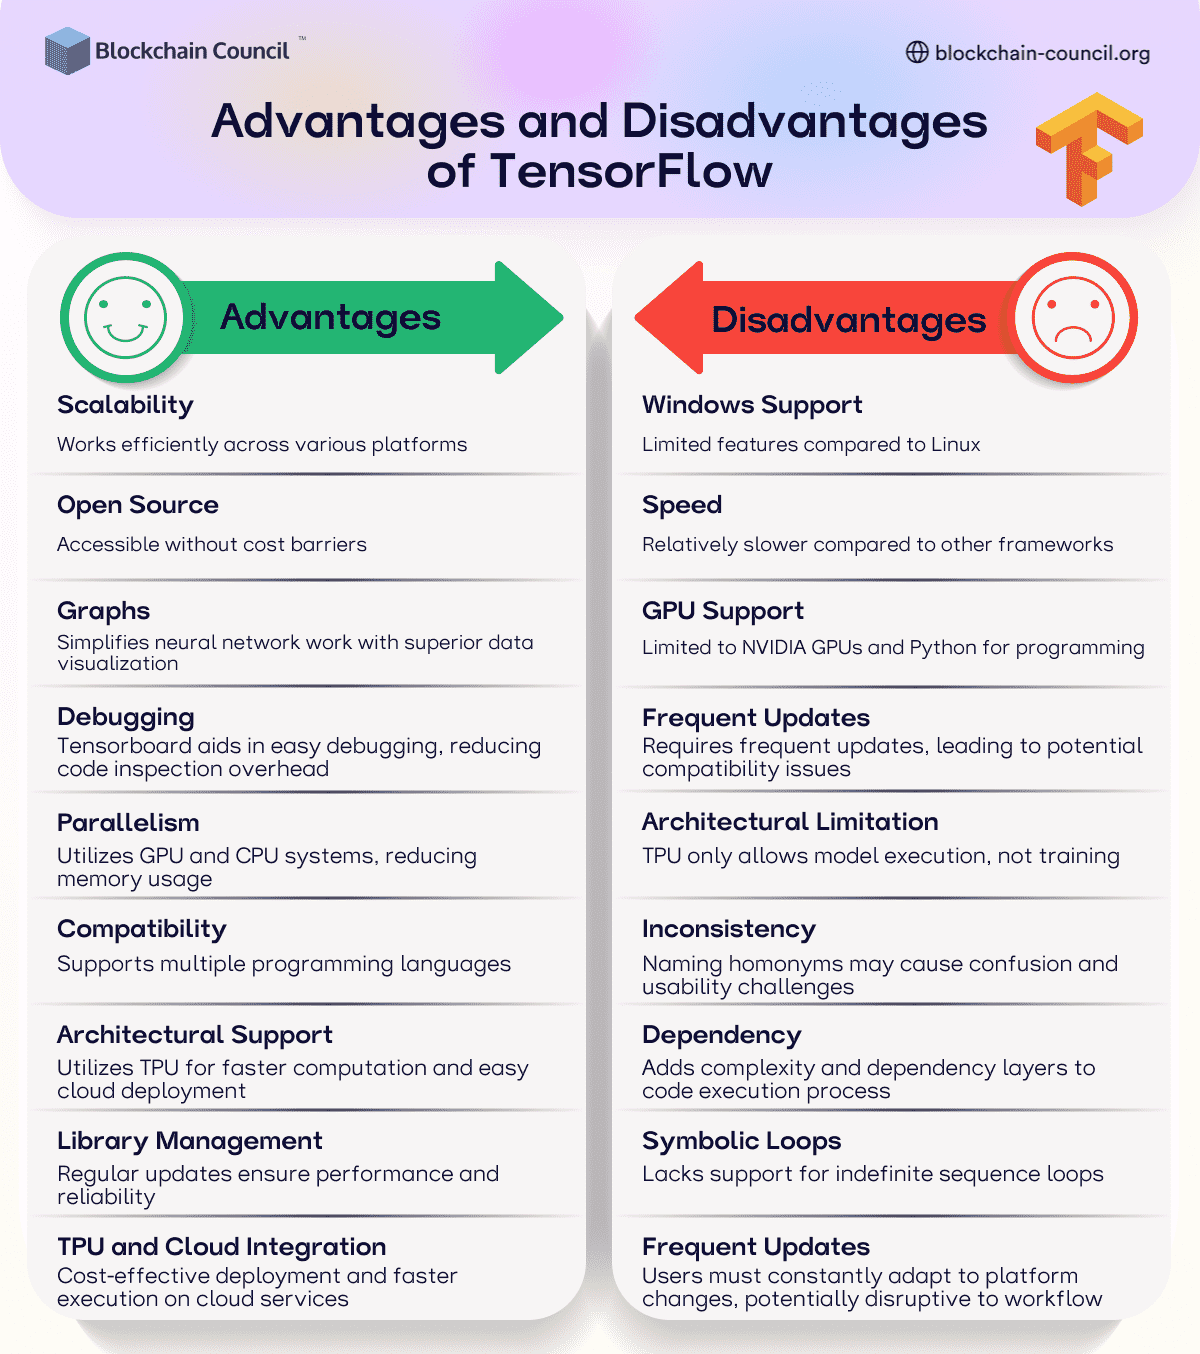 Advantages and Disadvantages of TensorFlow